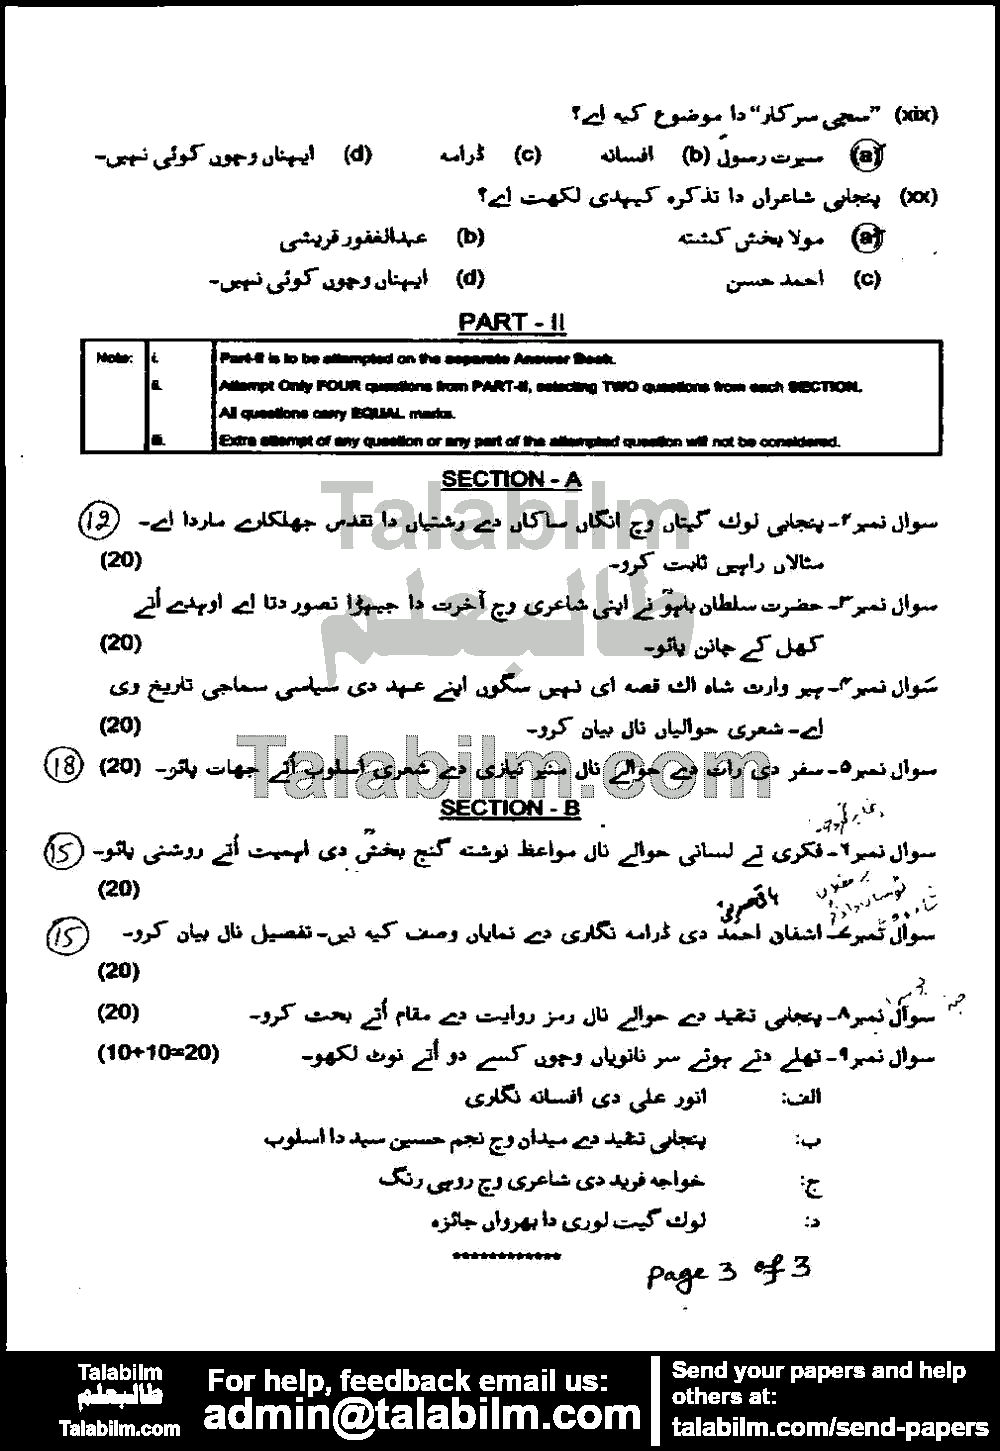 Punjabi 0 past paper for 2011 Page No. 3